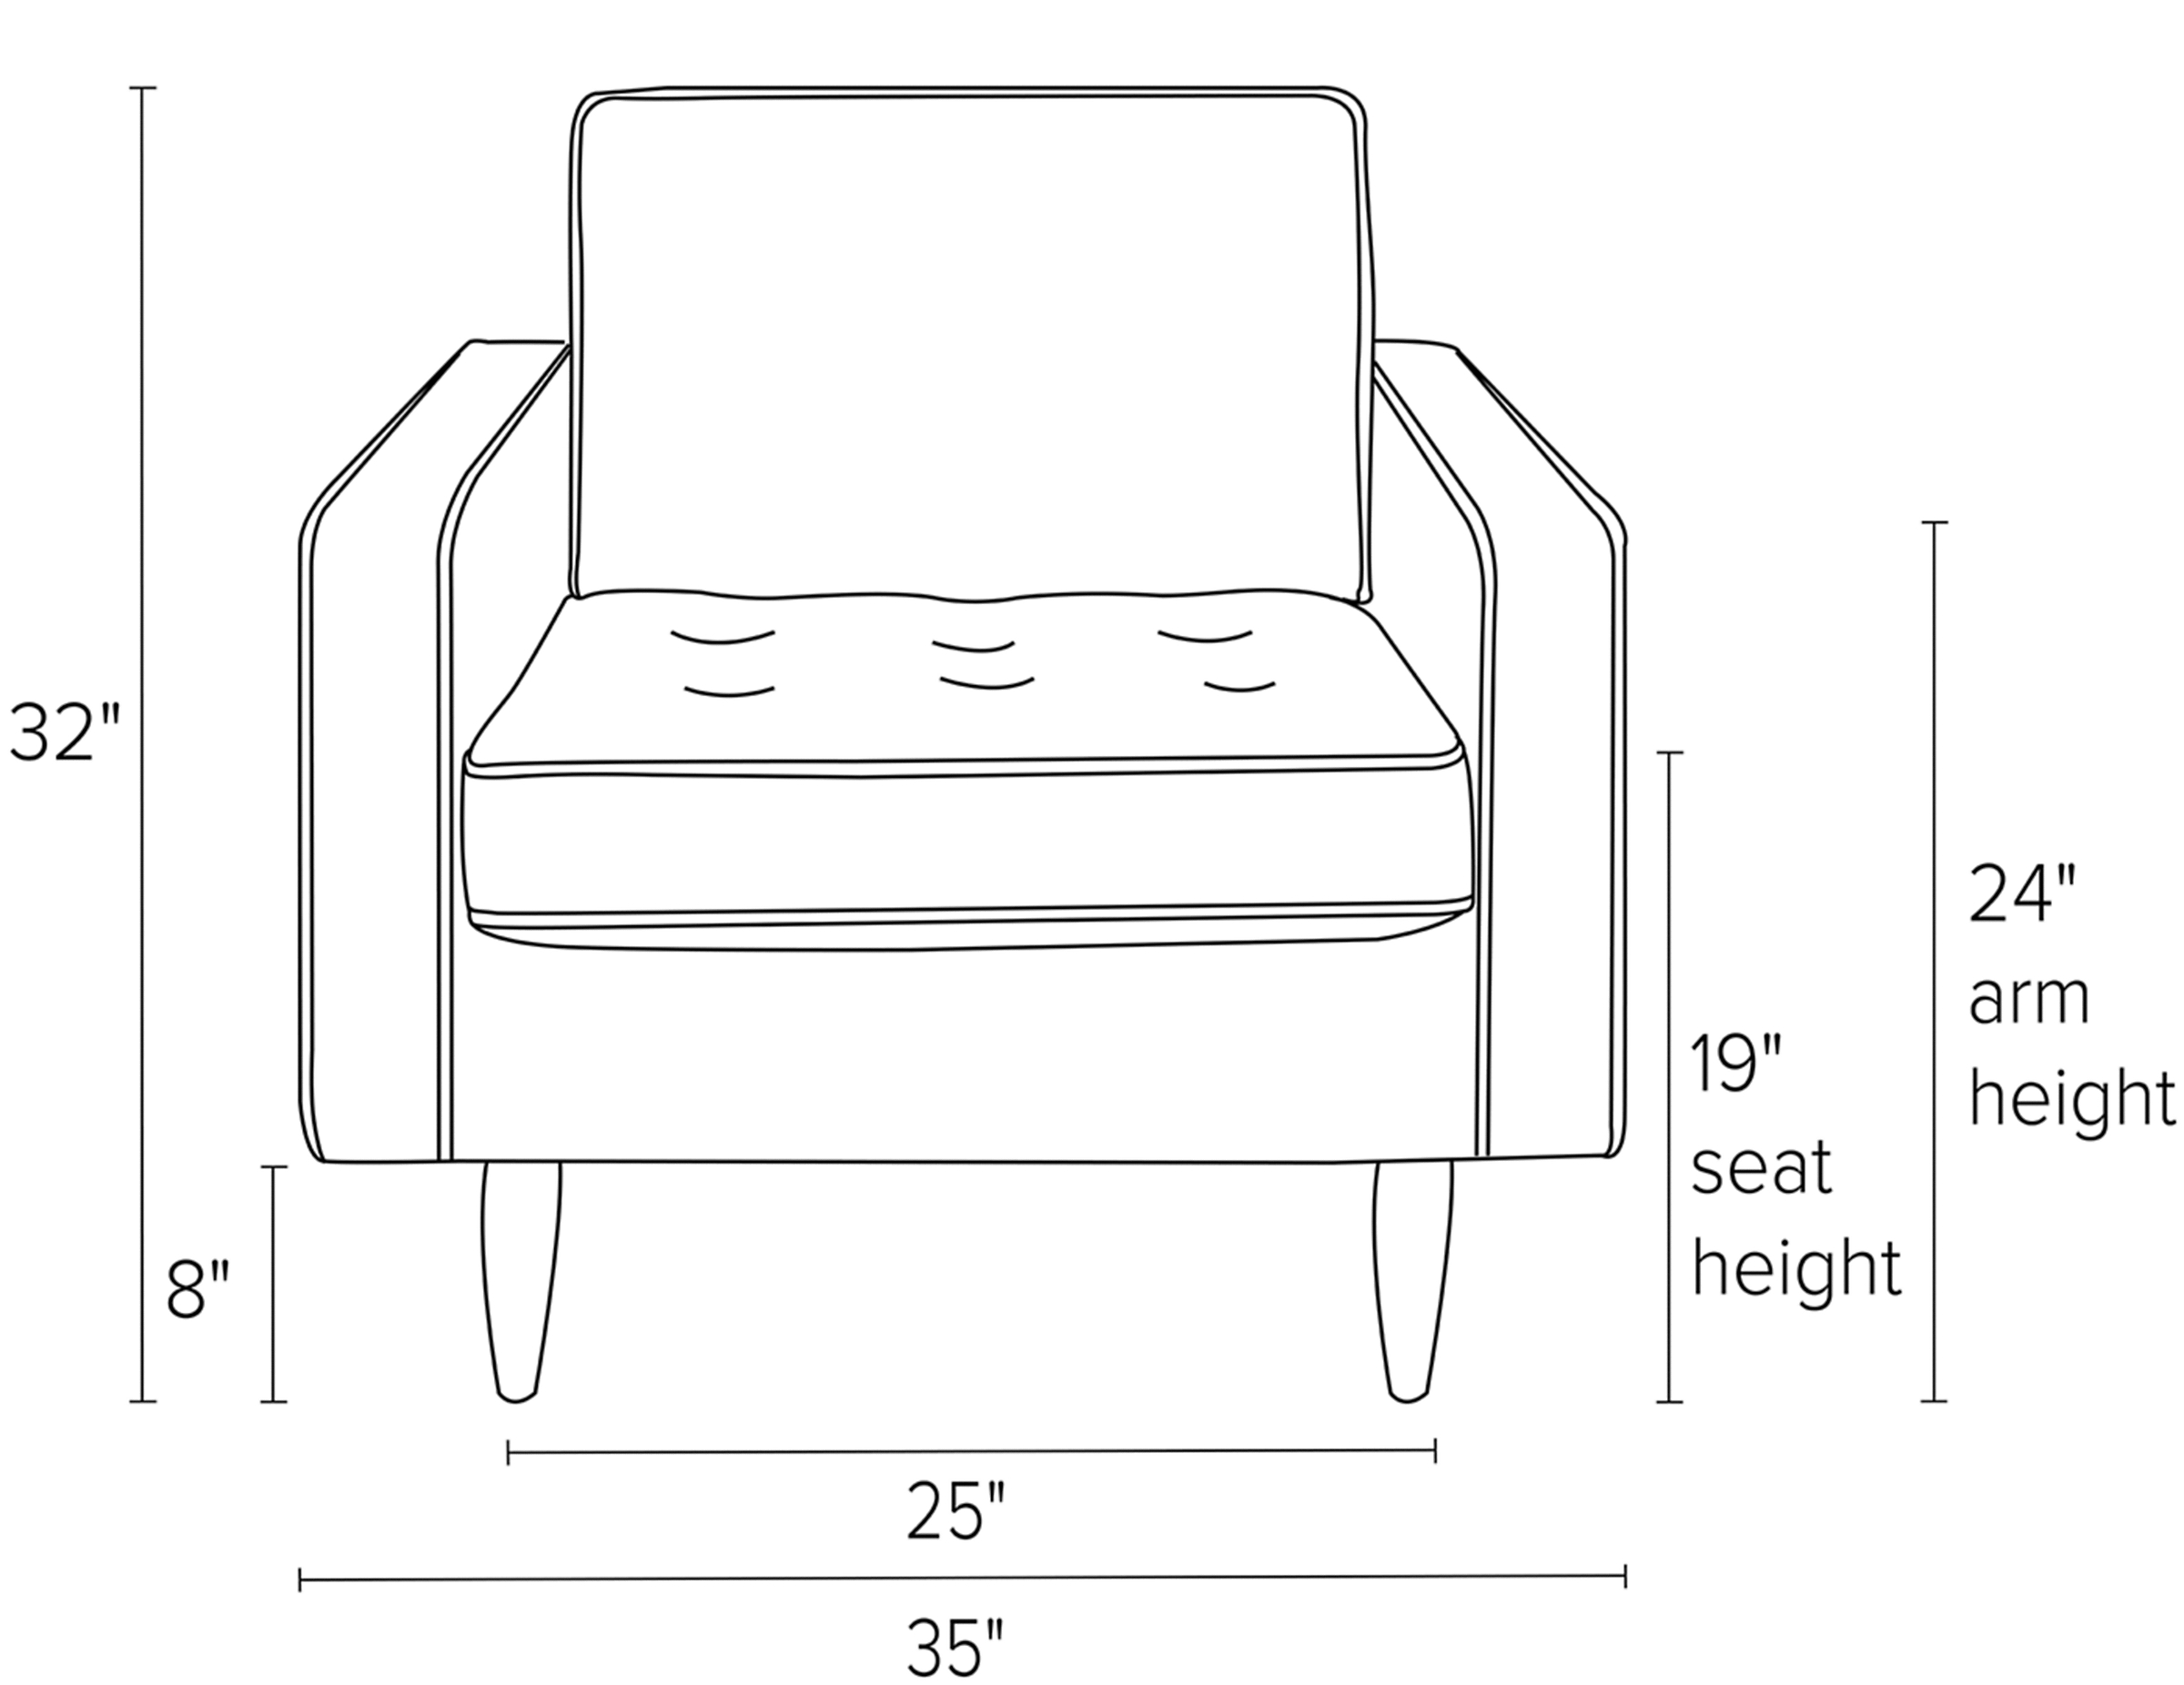 Front view dimension illustration of Reese chair.